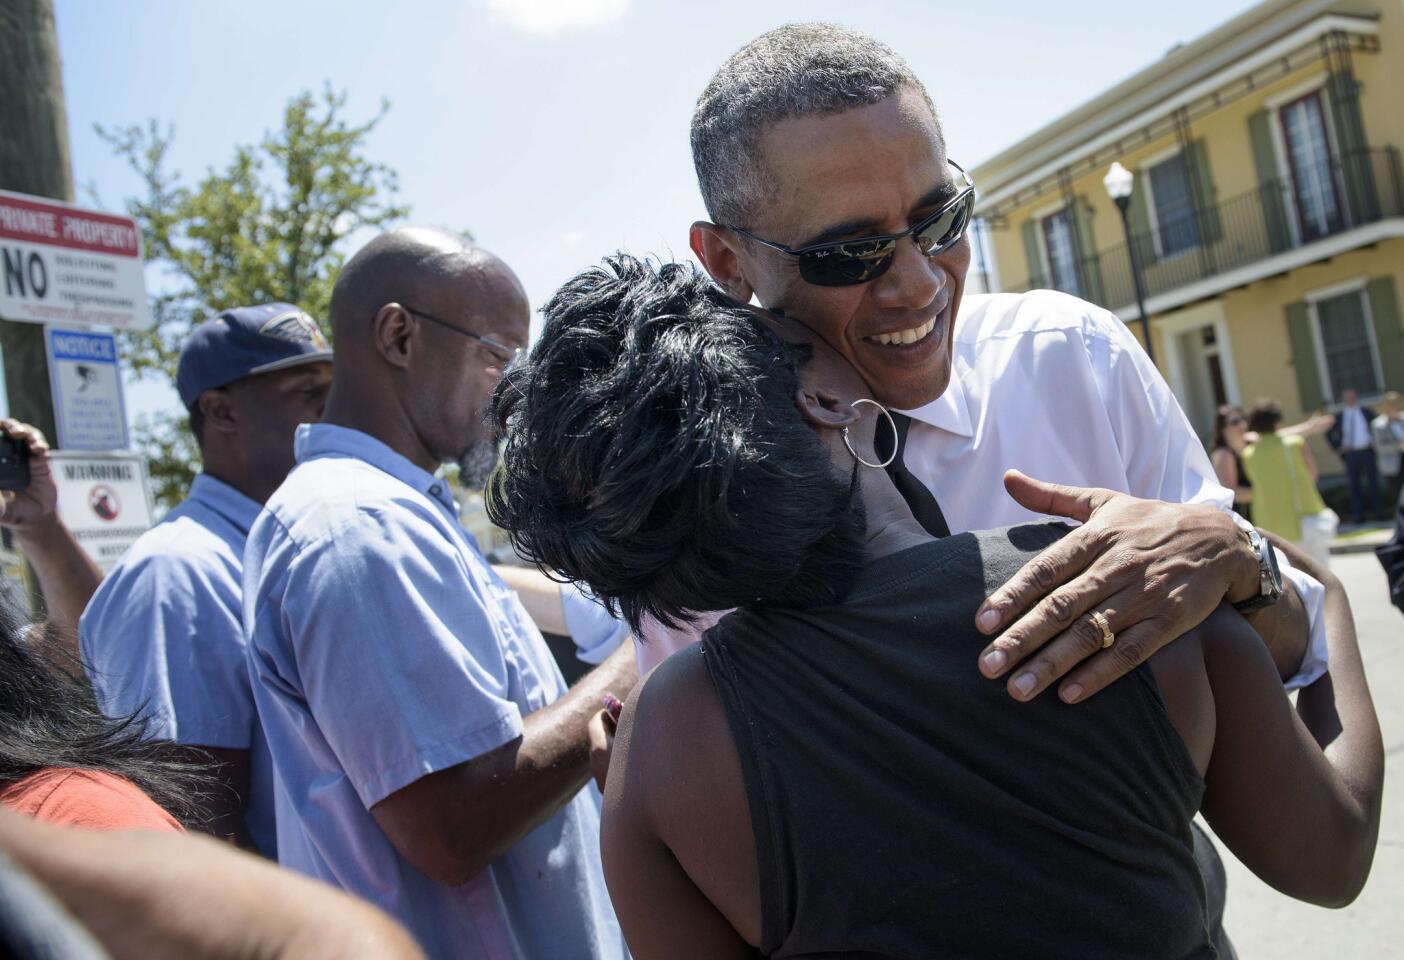 President Barack Obama hugs a woman during a tour of New Orleans' Treme neighborhood Aug. 27, 2015.